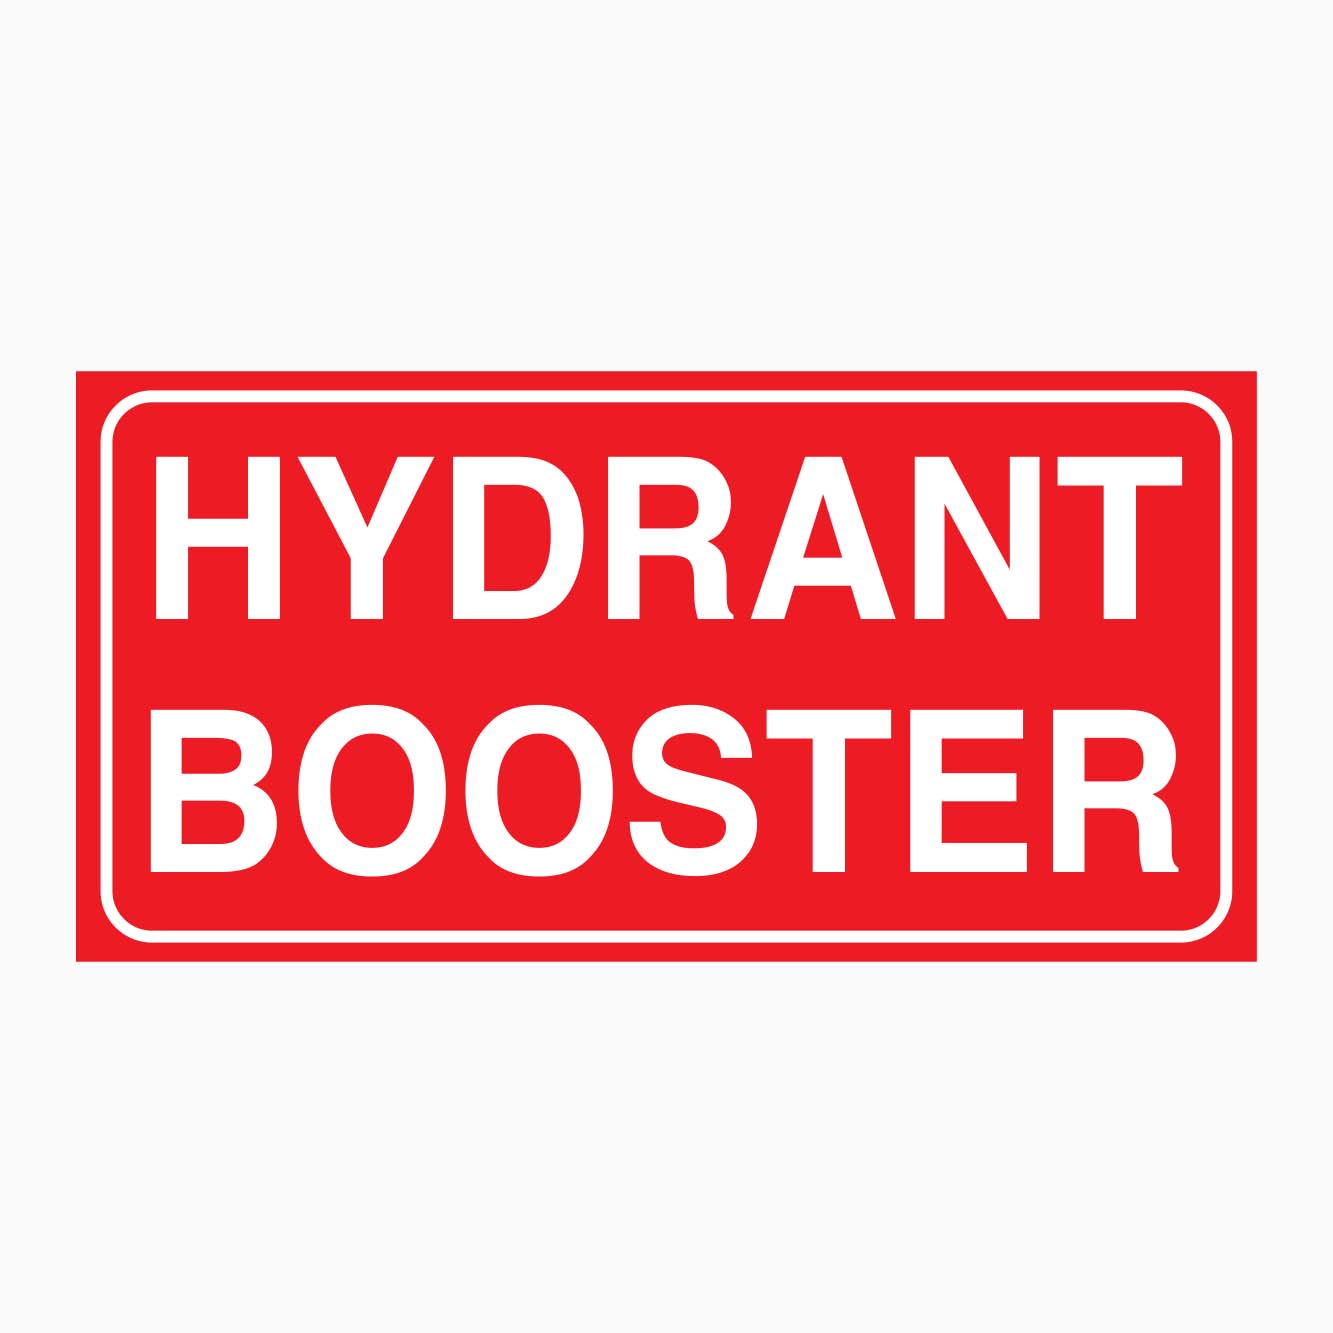 HYDRANT BOOSTER SIGN